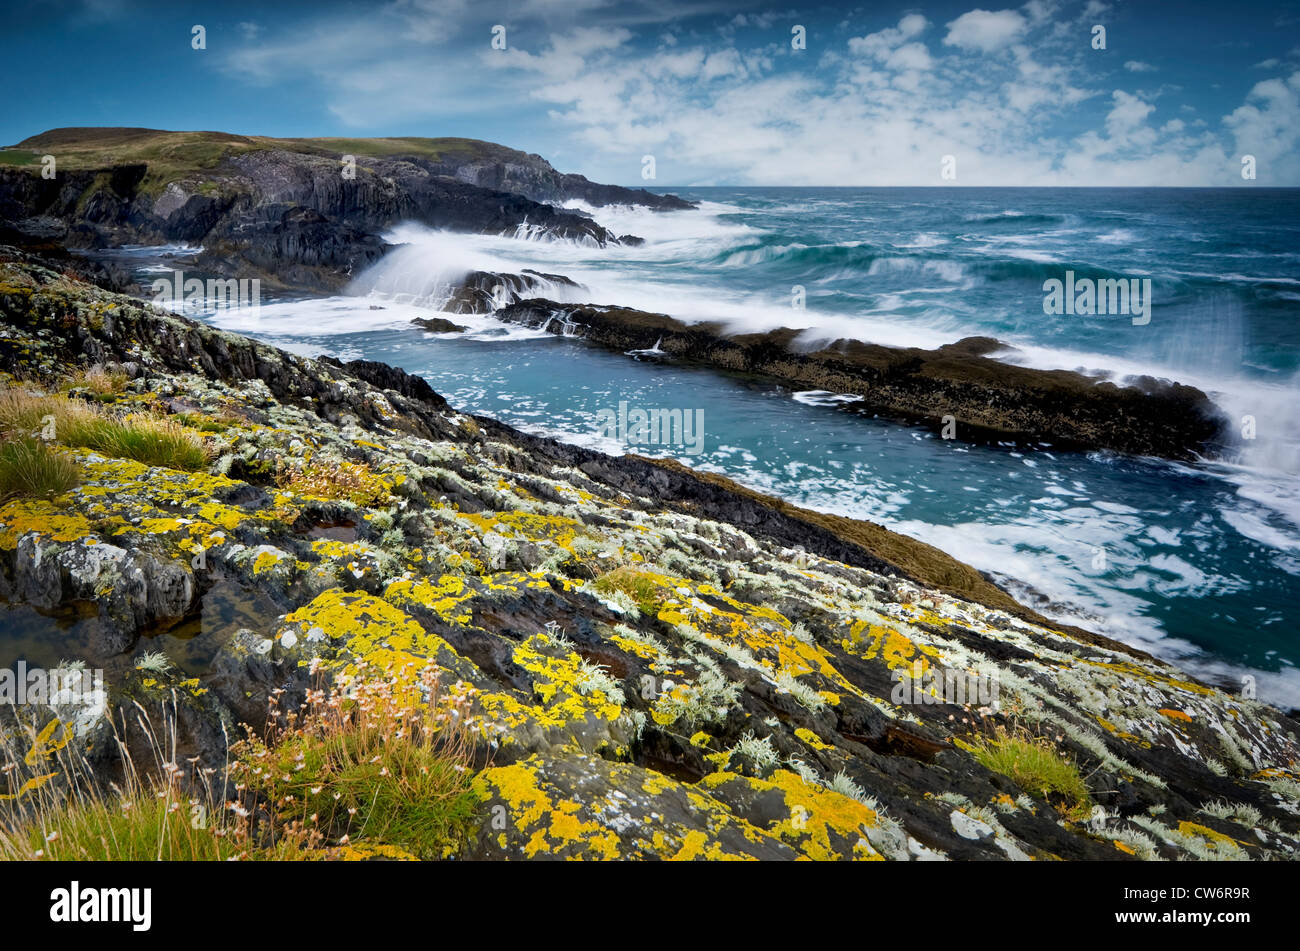 Rocky coast of Atlantic Ocean during stormy weather, South West of Ireland Stock Photo